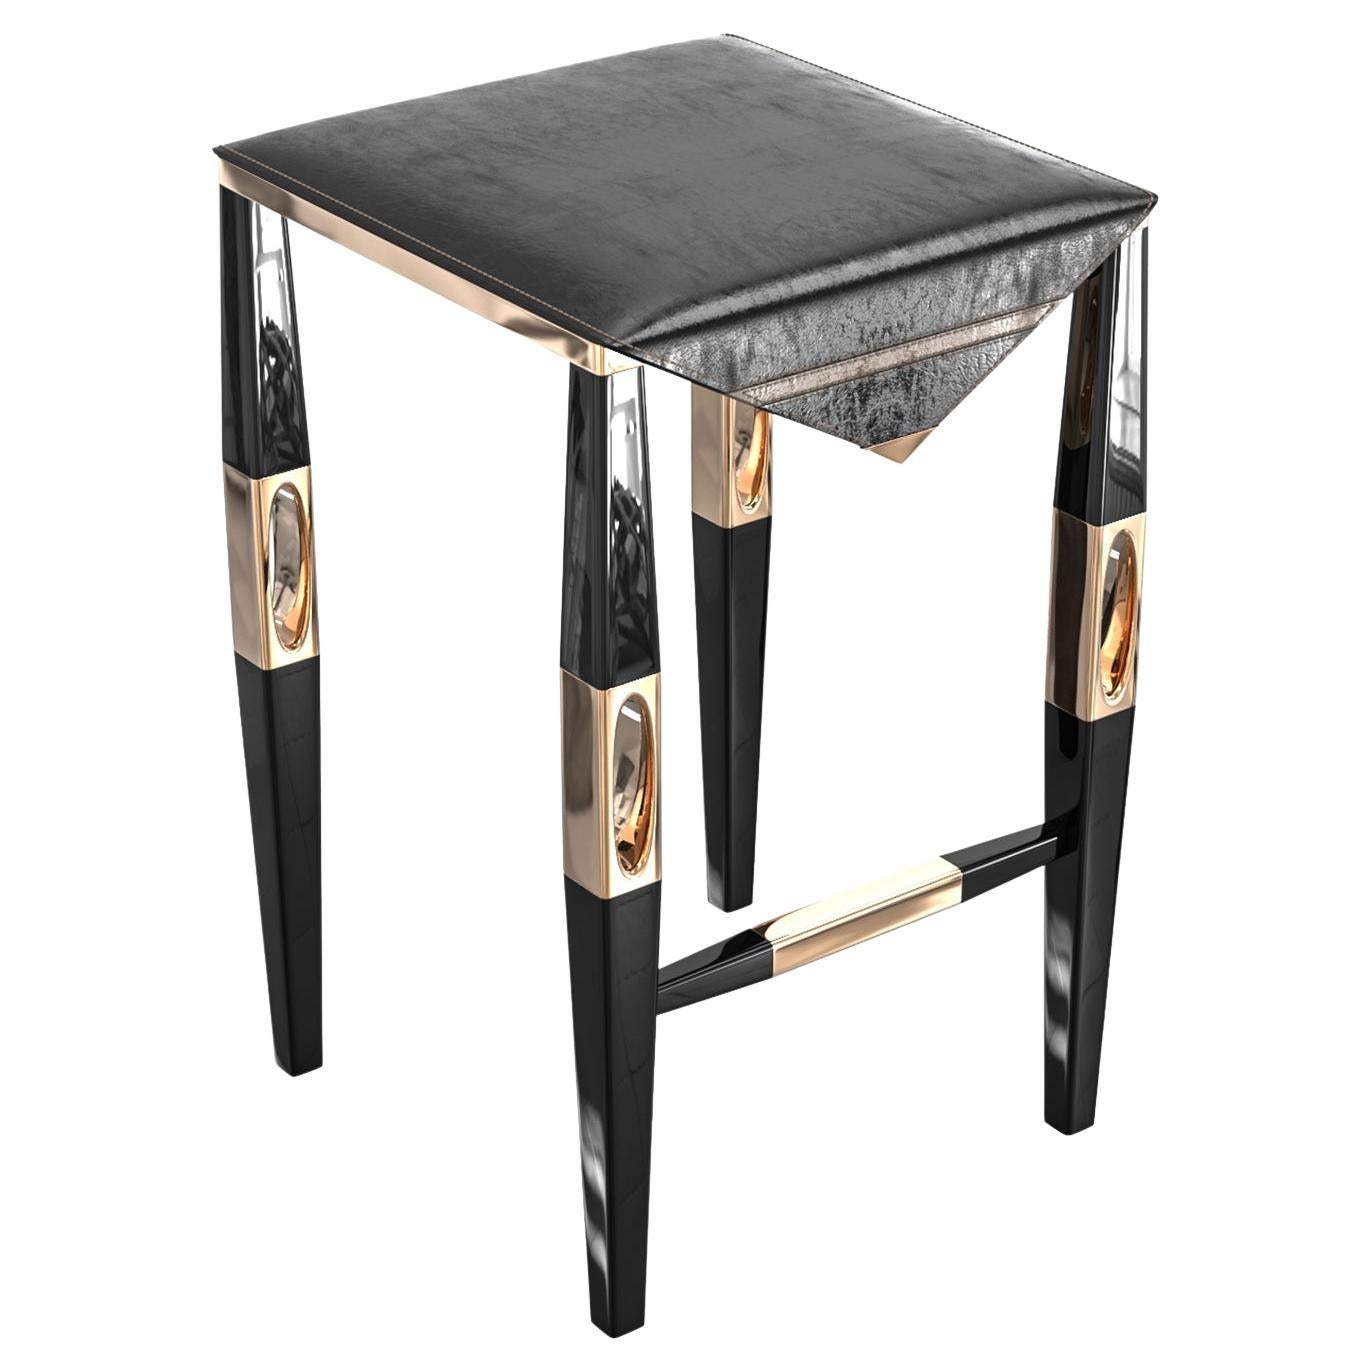 "Celebre" Bar Stool with Stainless Steel and Bronze, Istanbul